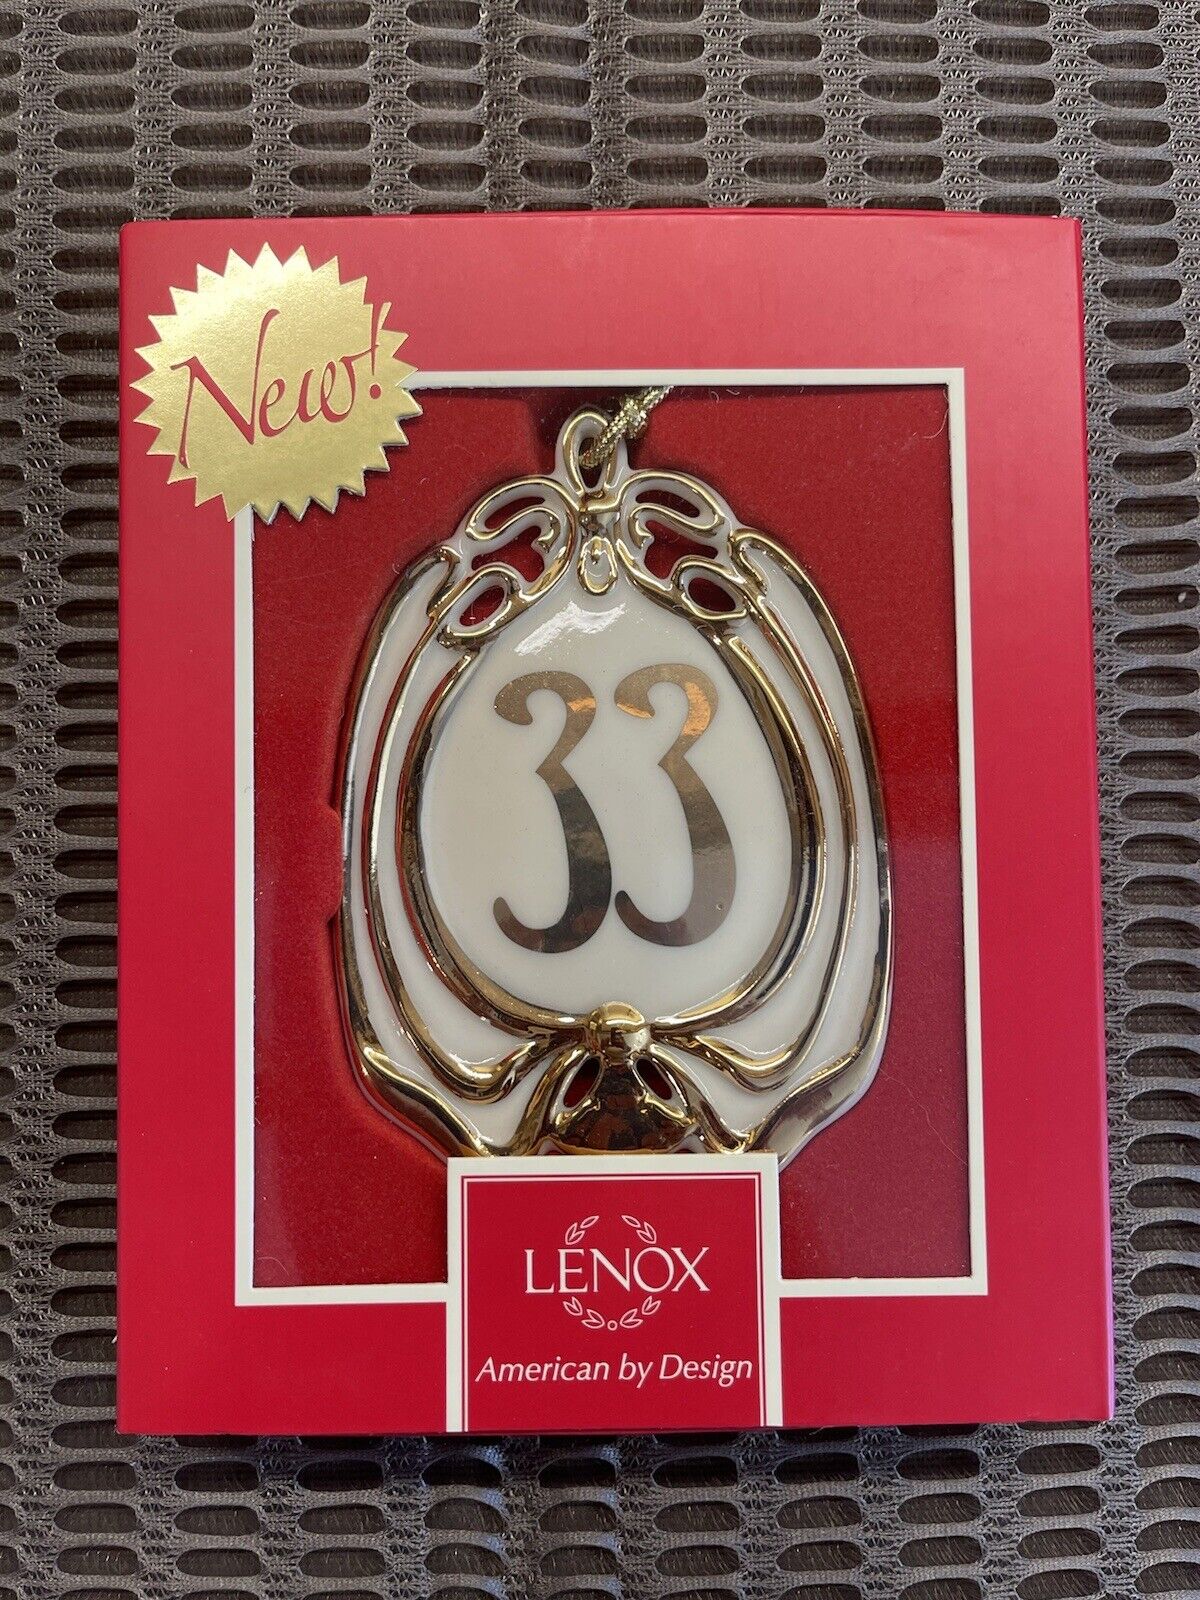 Club 33 Exclusive 2014  Lenox Holiday Christmas Ornament RARE New In Box